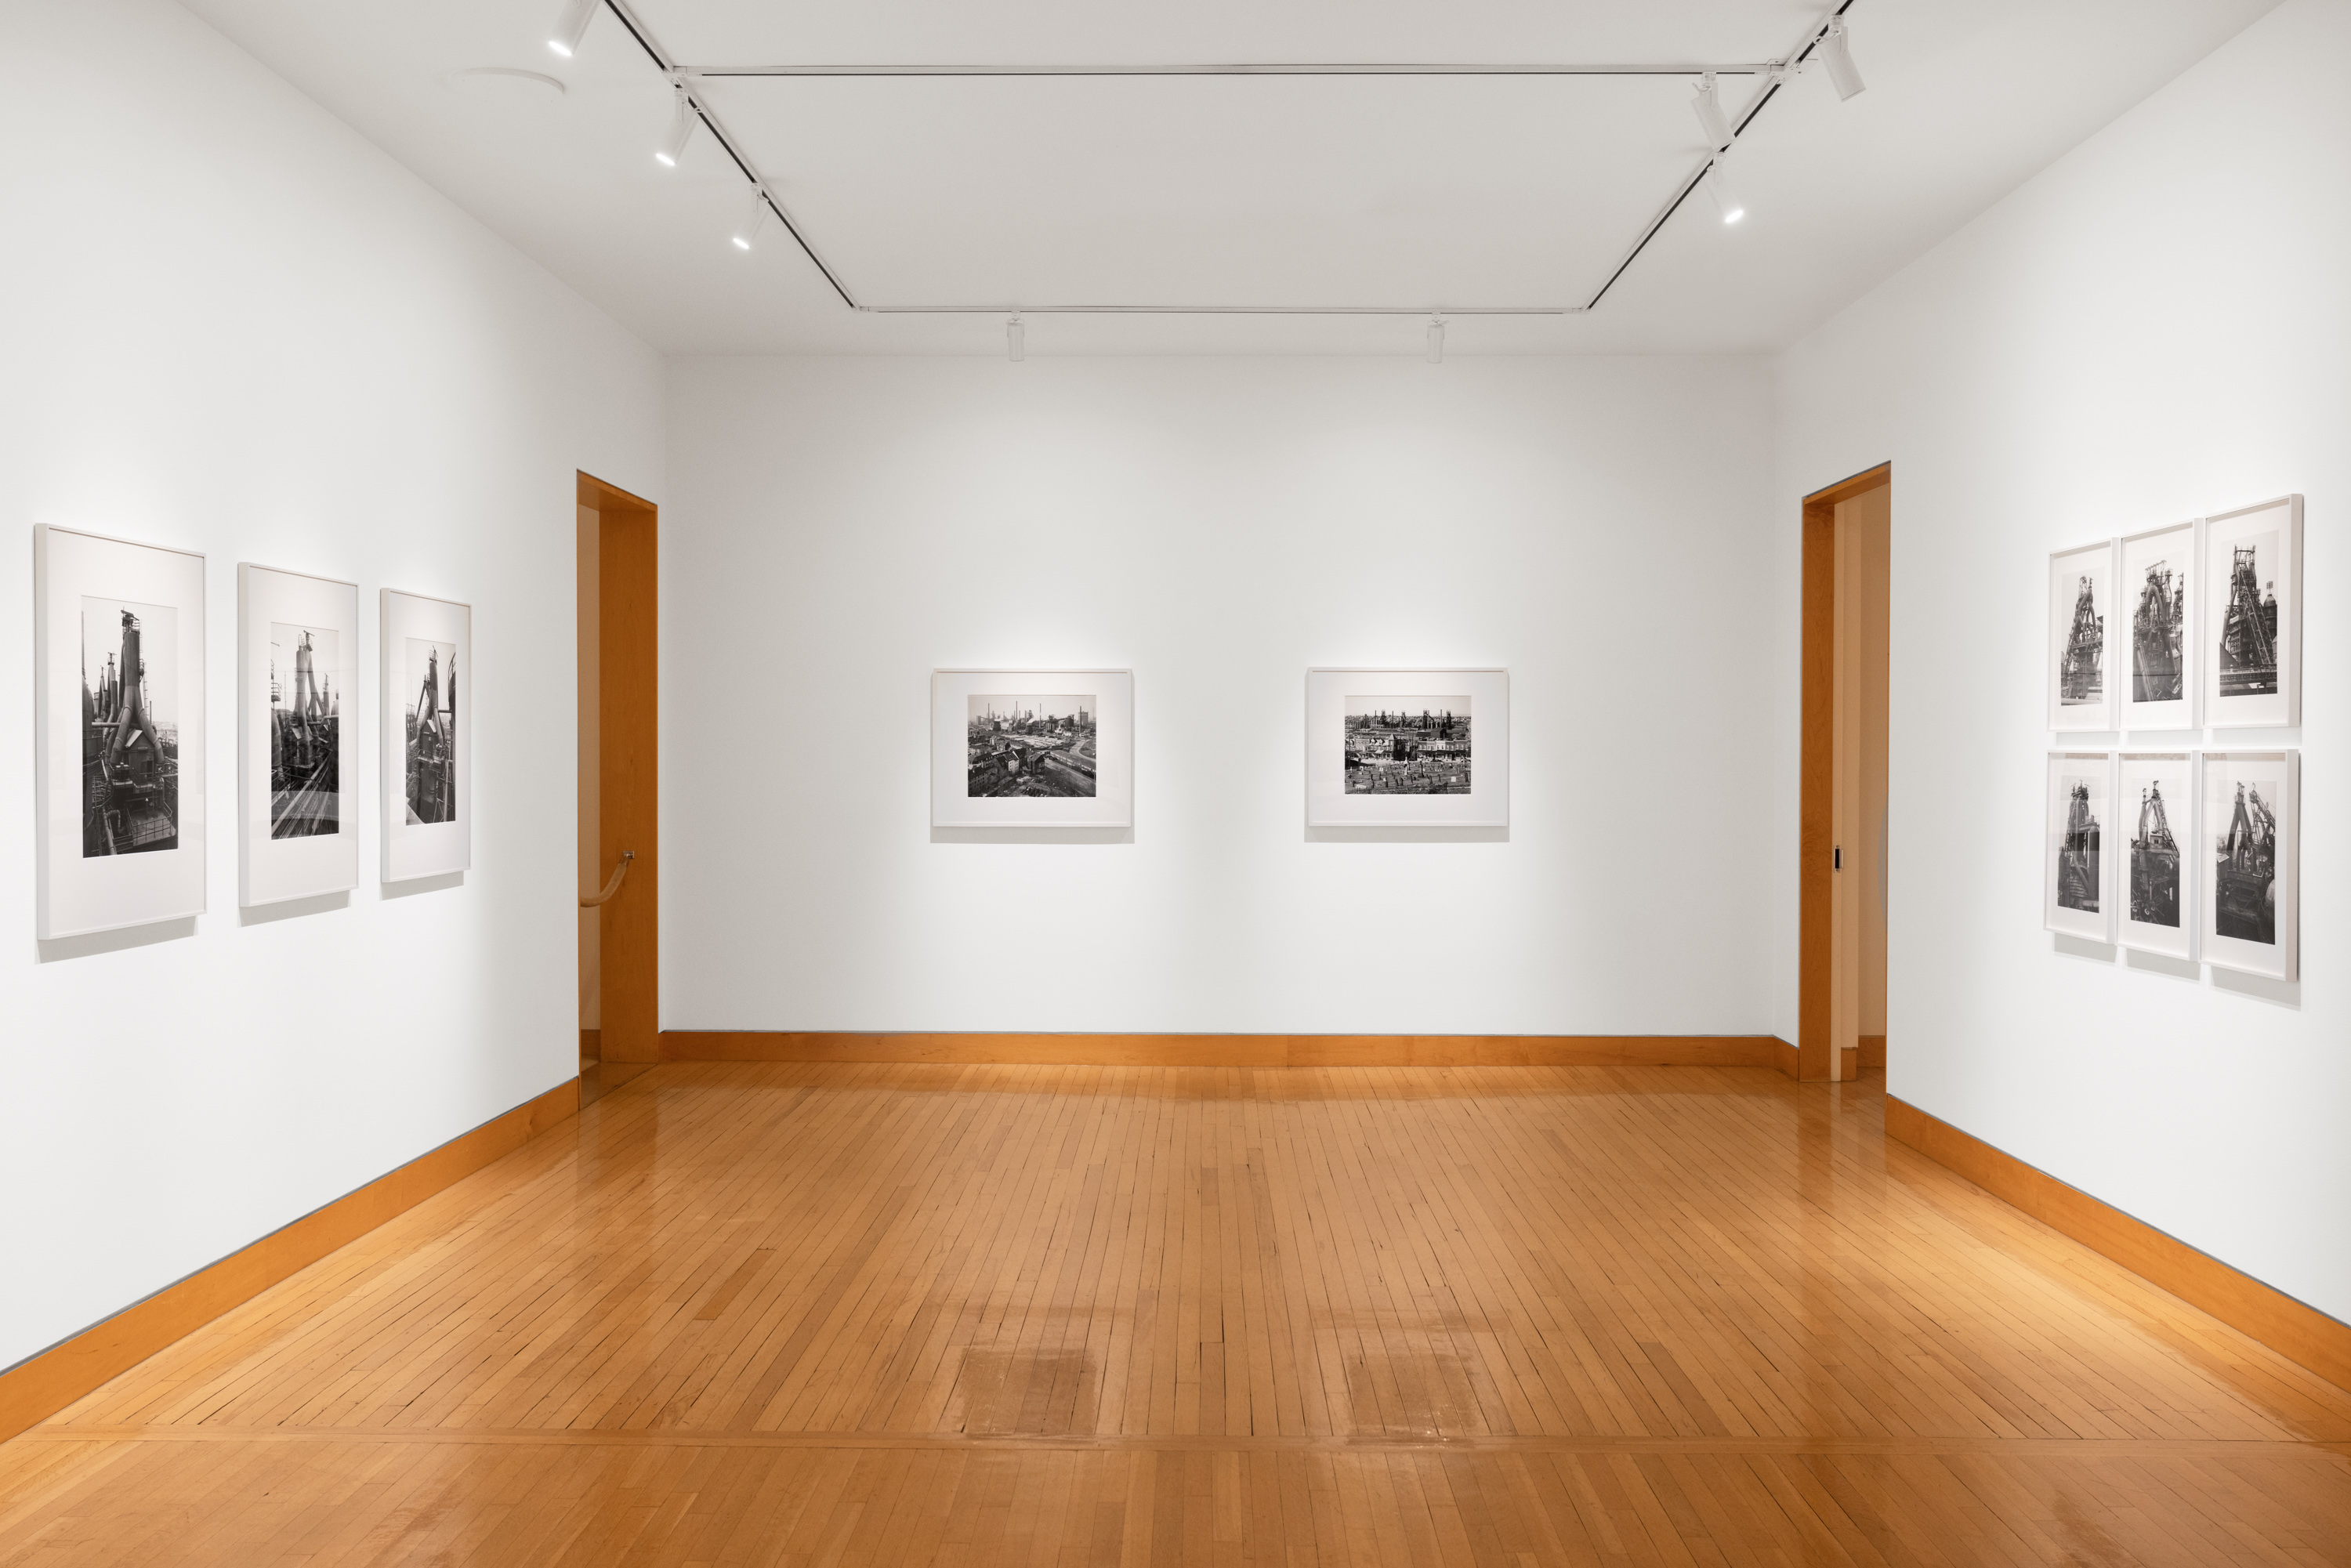 Color image of black and white photographs of industrial furnaces and landscapes, framed in white on white gallery walls